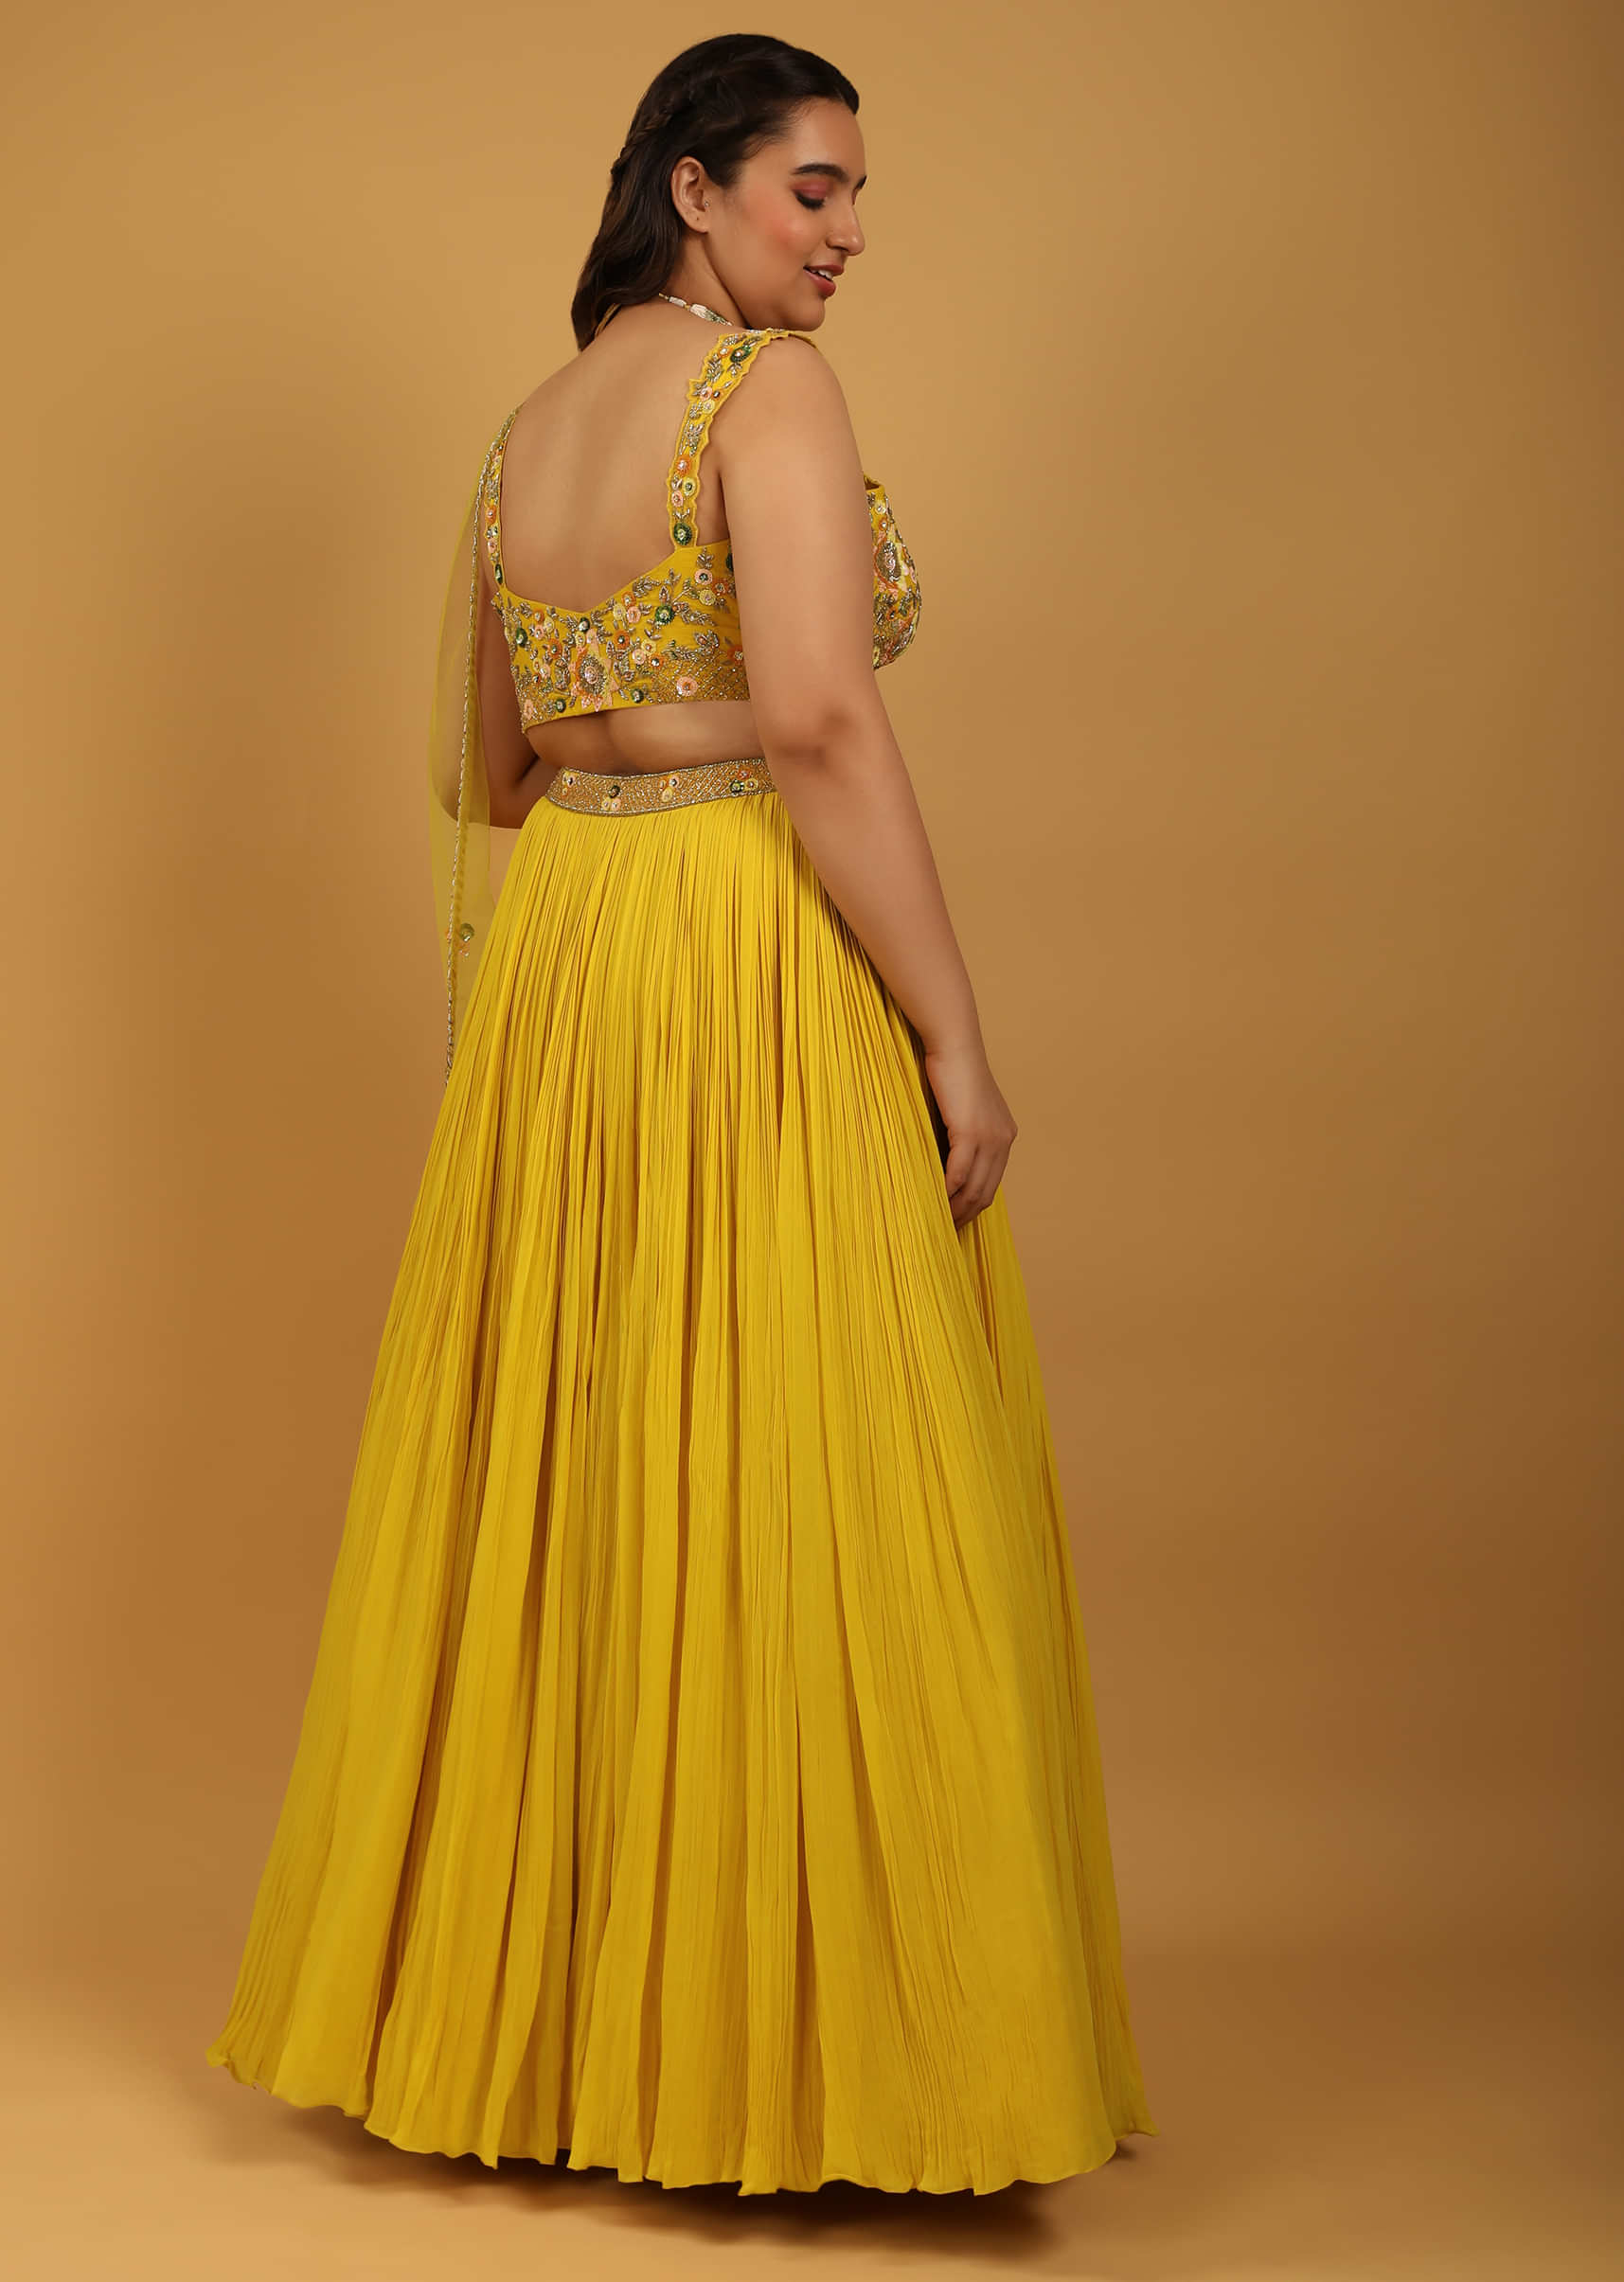 Sun-Yellow Gathered Lehenga With Hand-Embroidered Blouse In Floral Patterns and Sequins